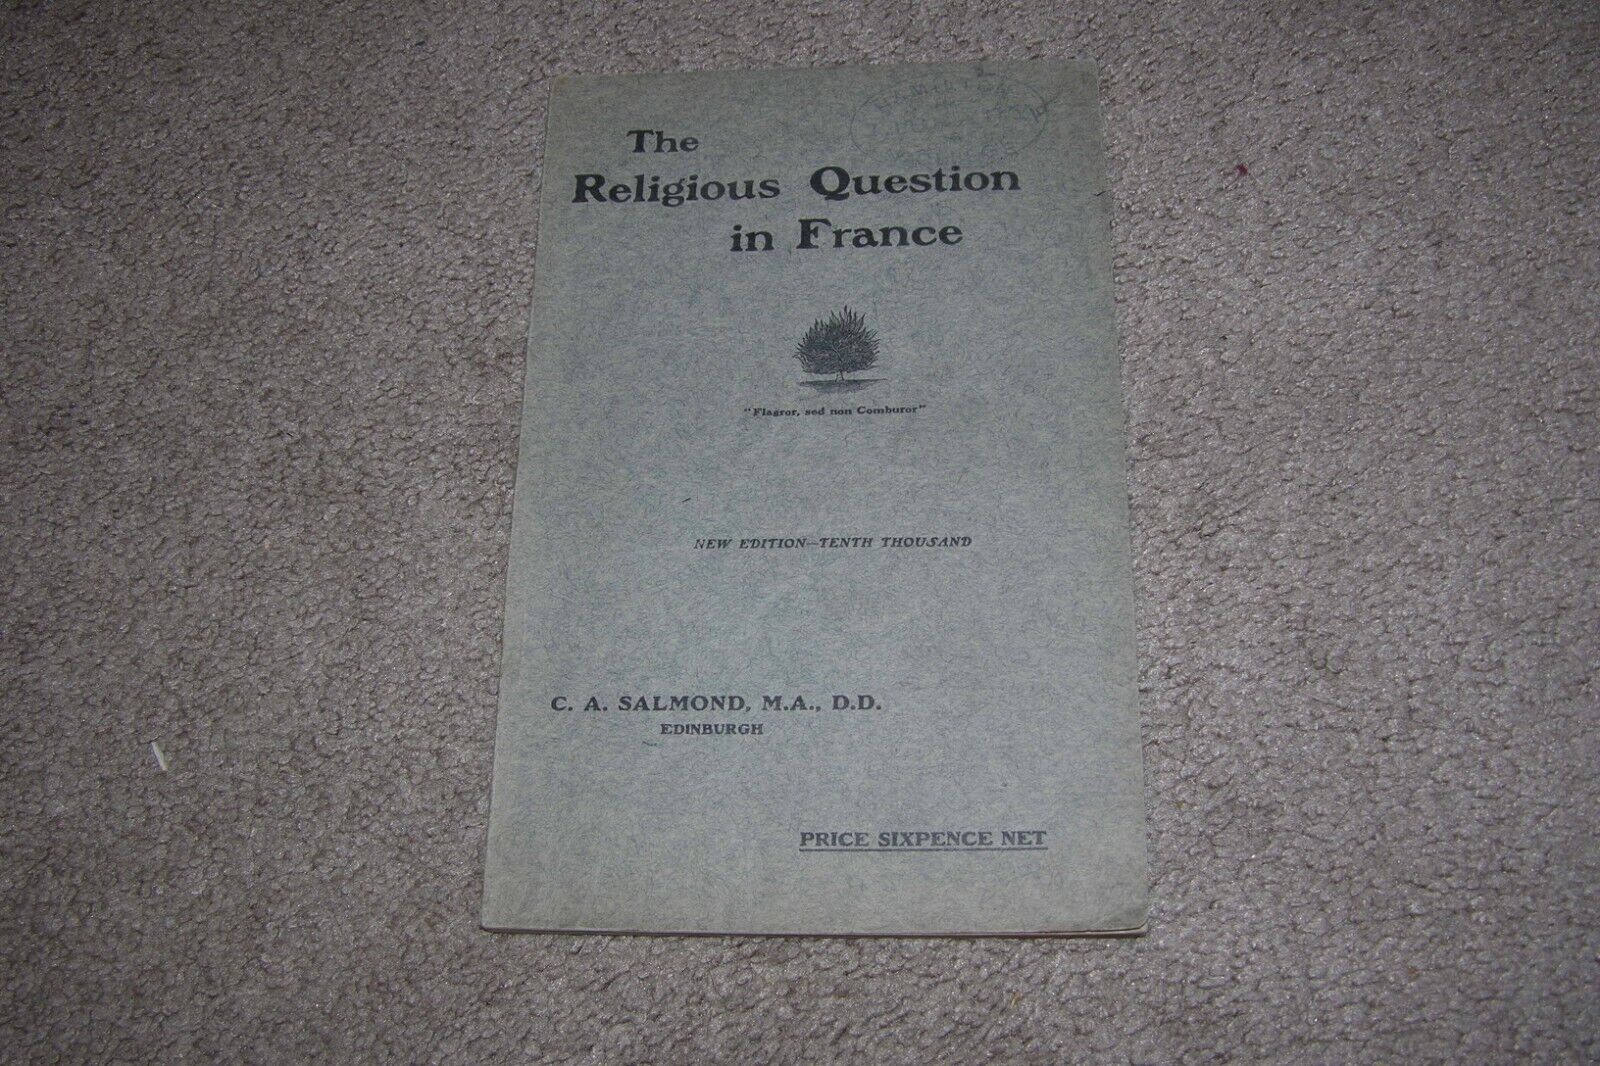 1905 The Religious Question in France by C.A. Salmond